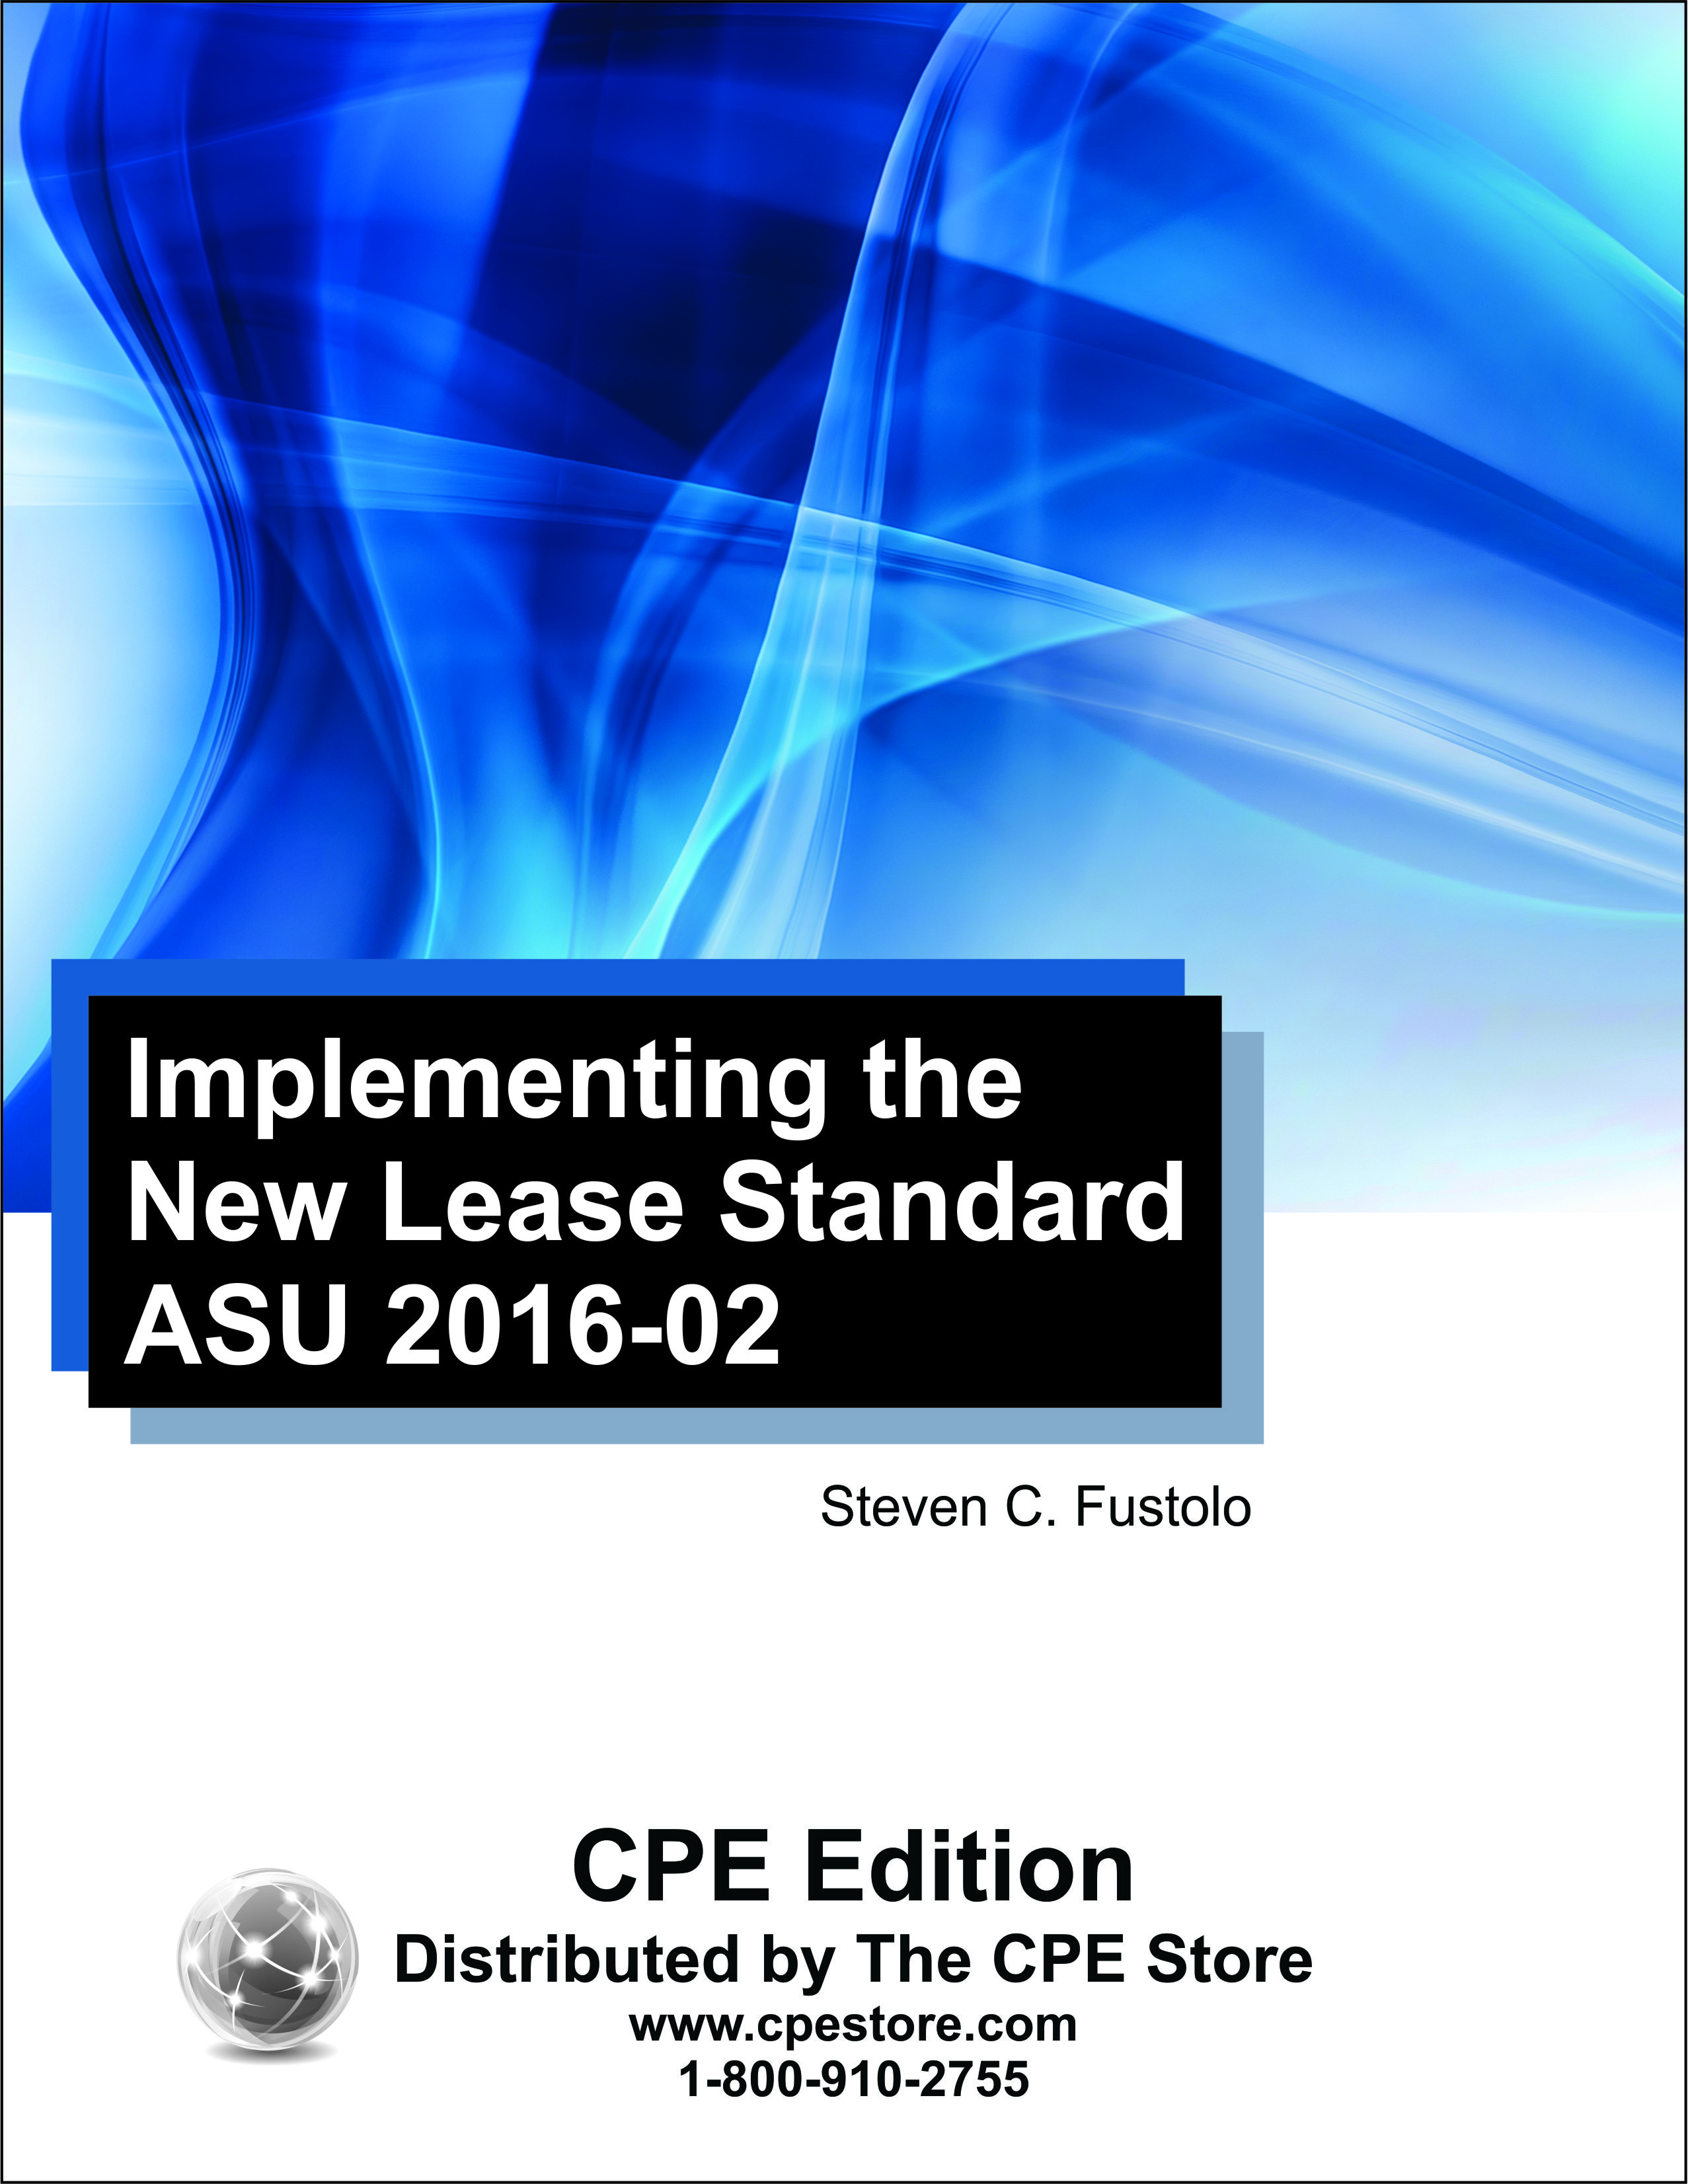 Implementing the New Lease Standard ASU 2016-02